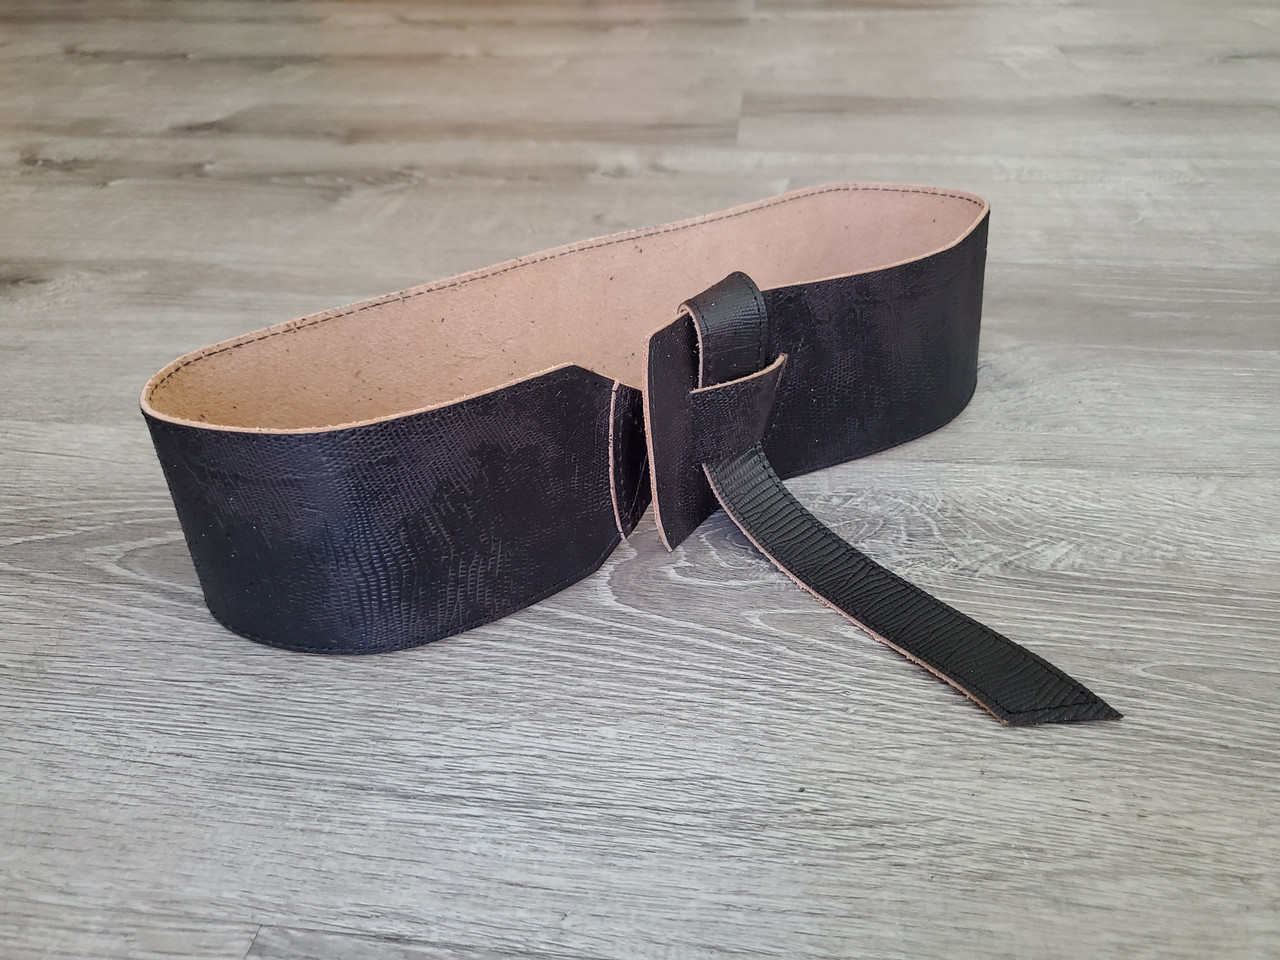 Custom Leather Belts. Hand Crafted in the USA.